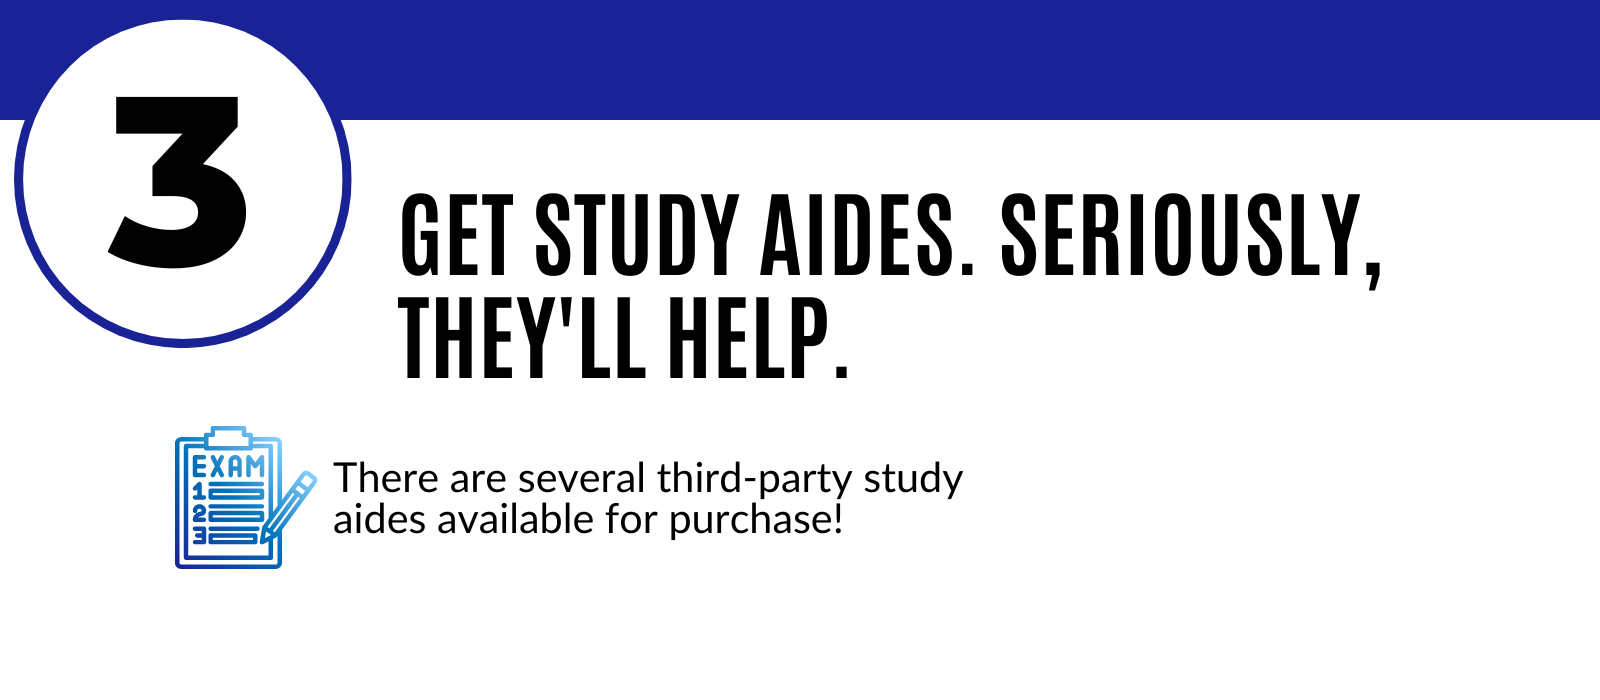 step 3: get study aides